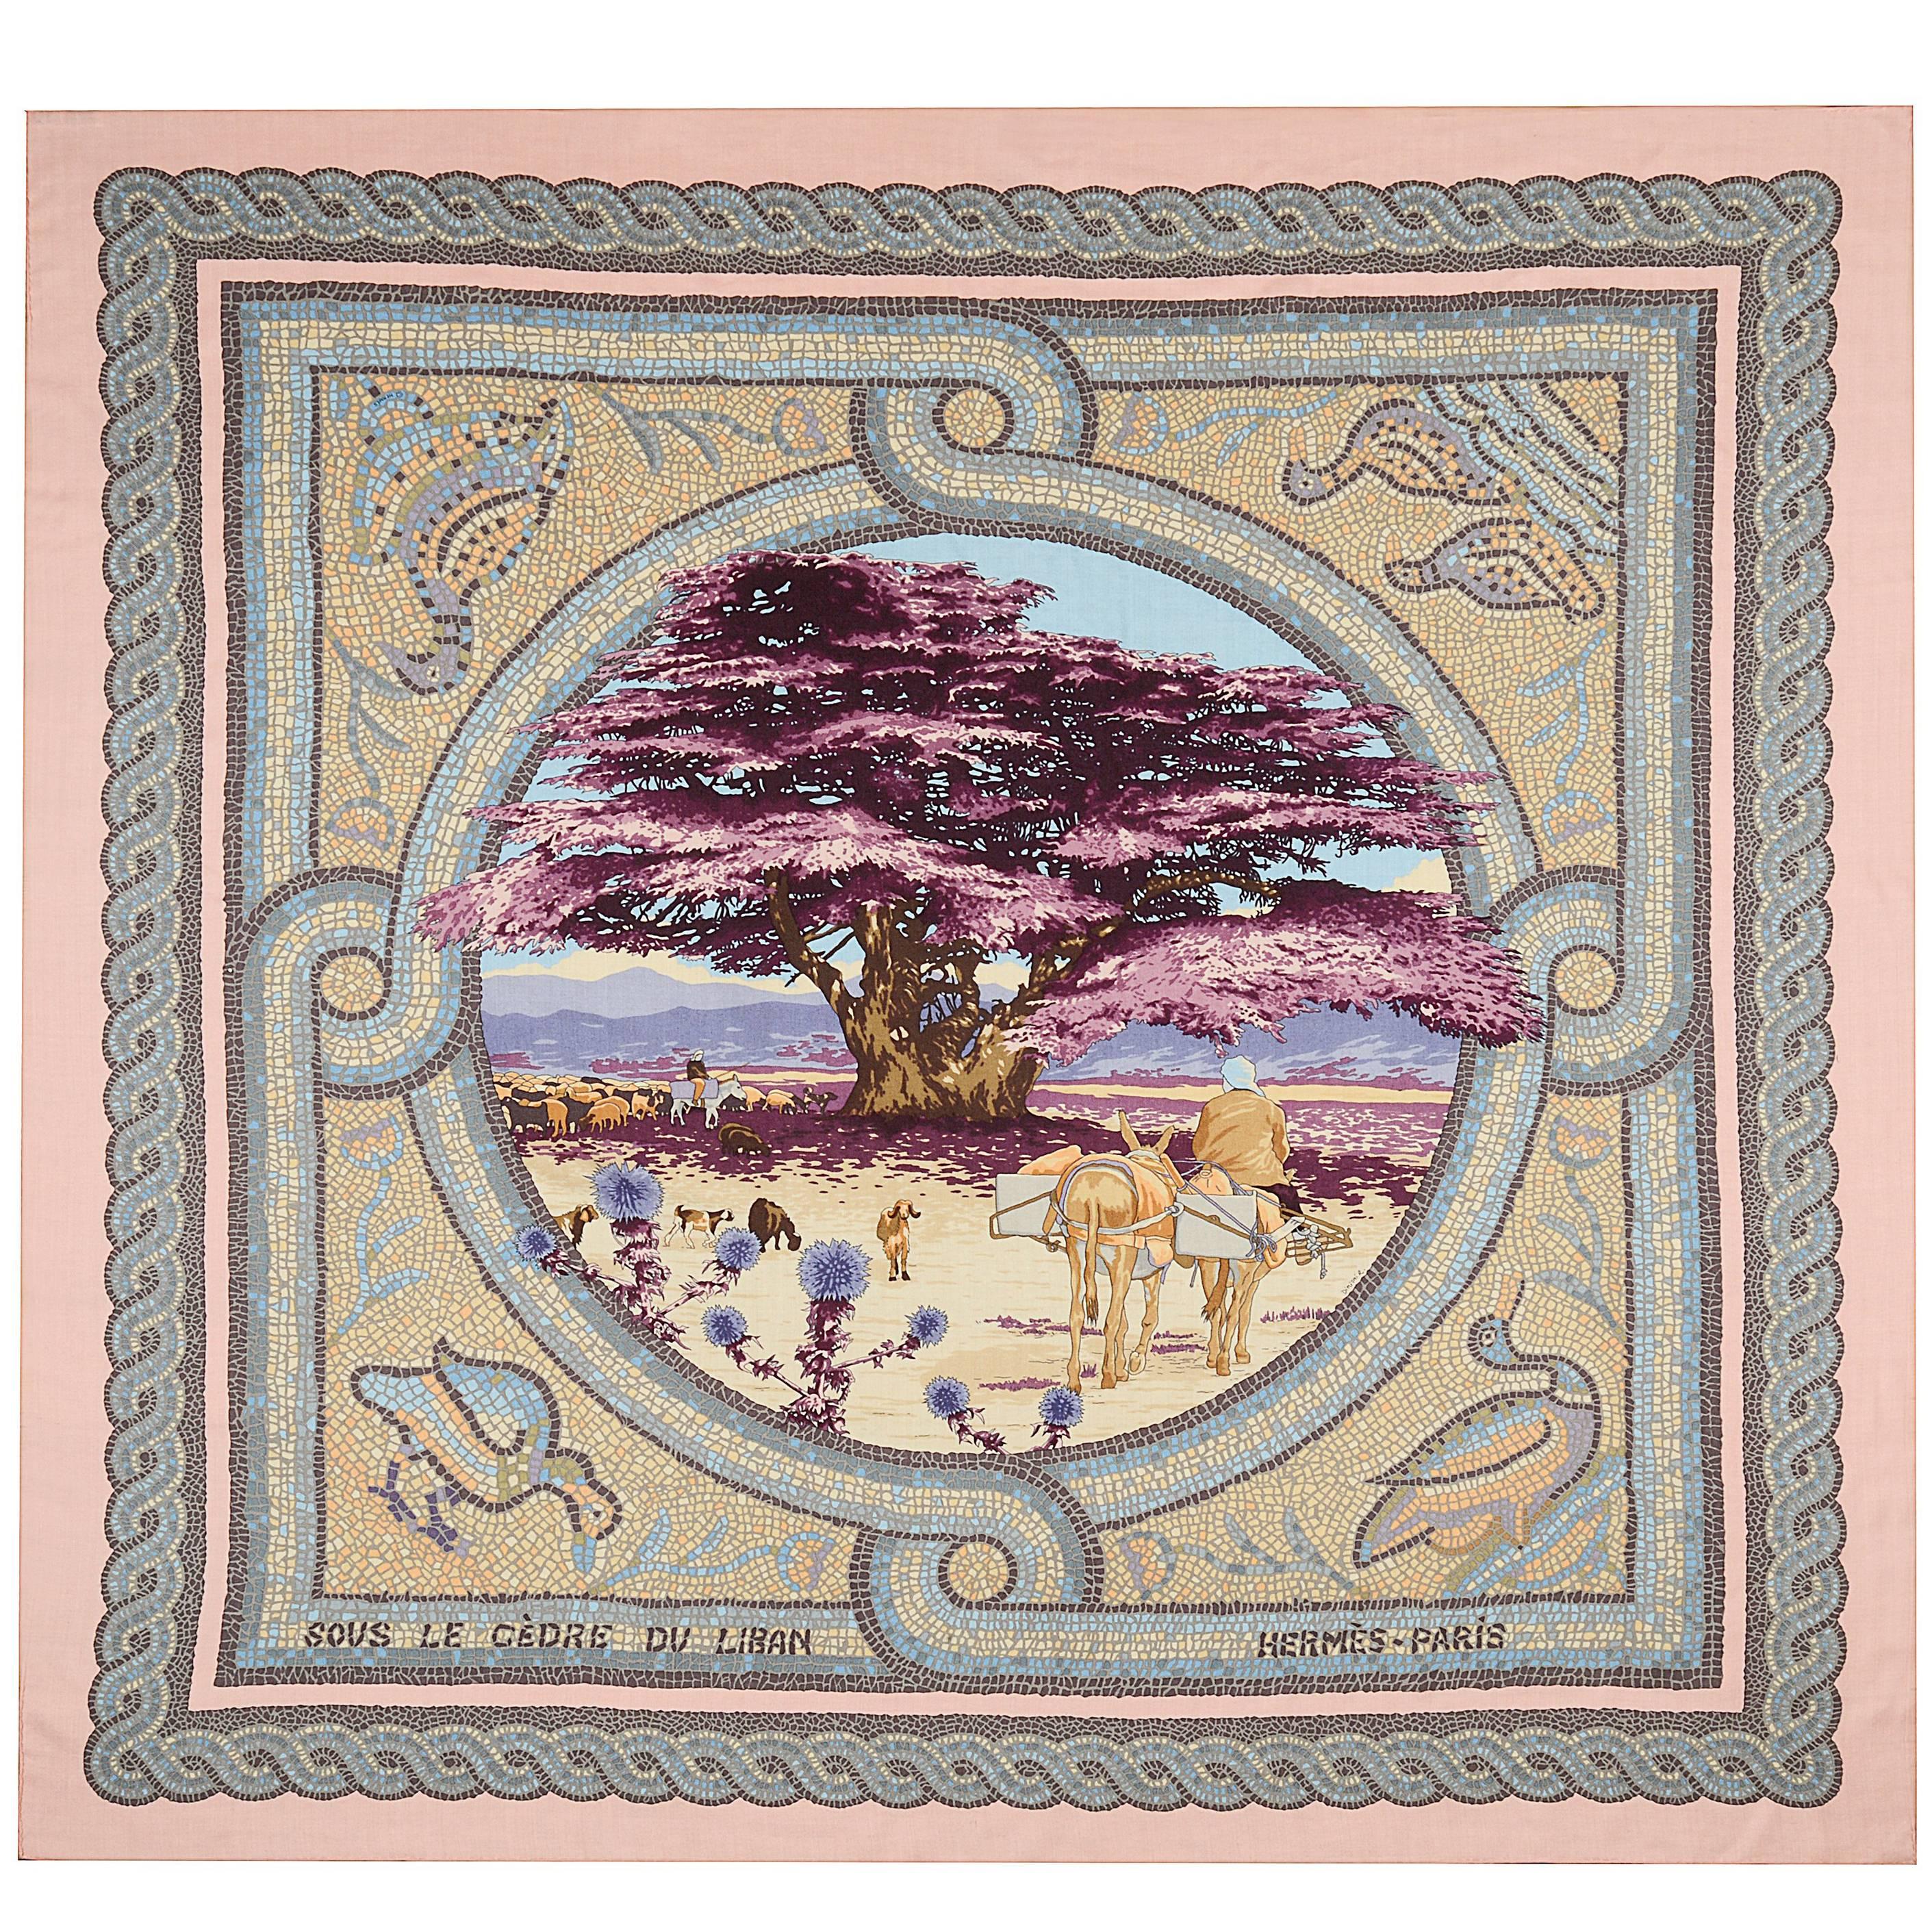 Hermes Paris pink cashmere and silk extra large square shawl scarf, 54" x 54"